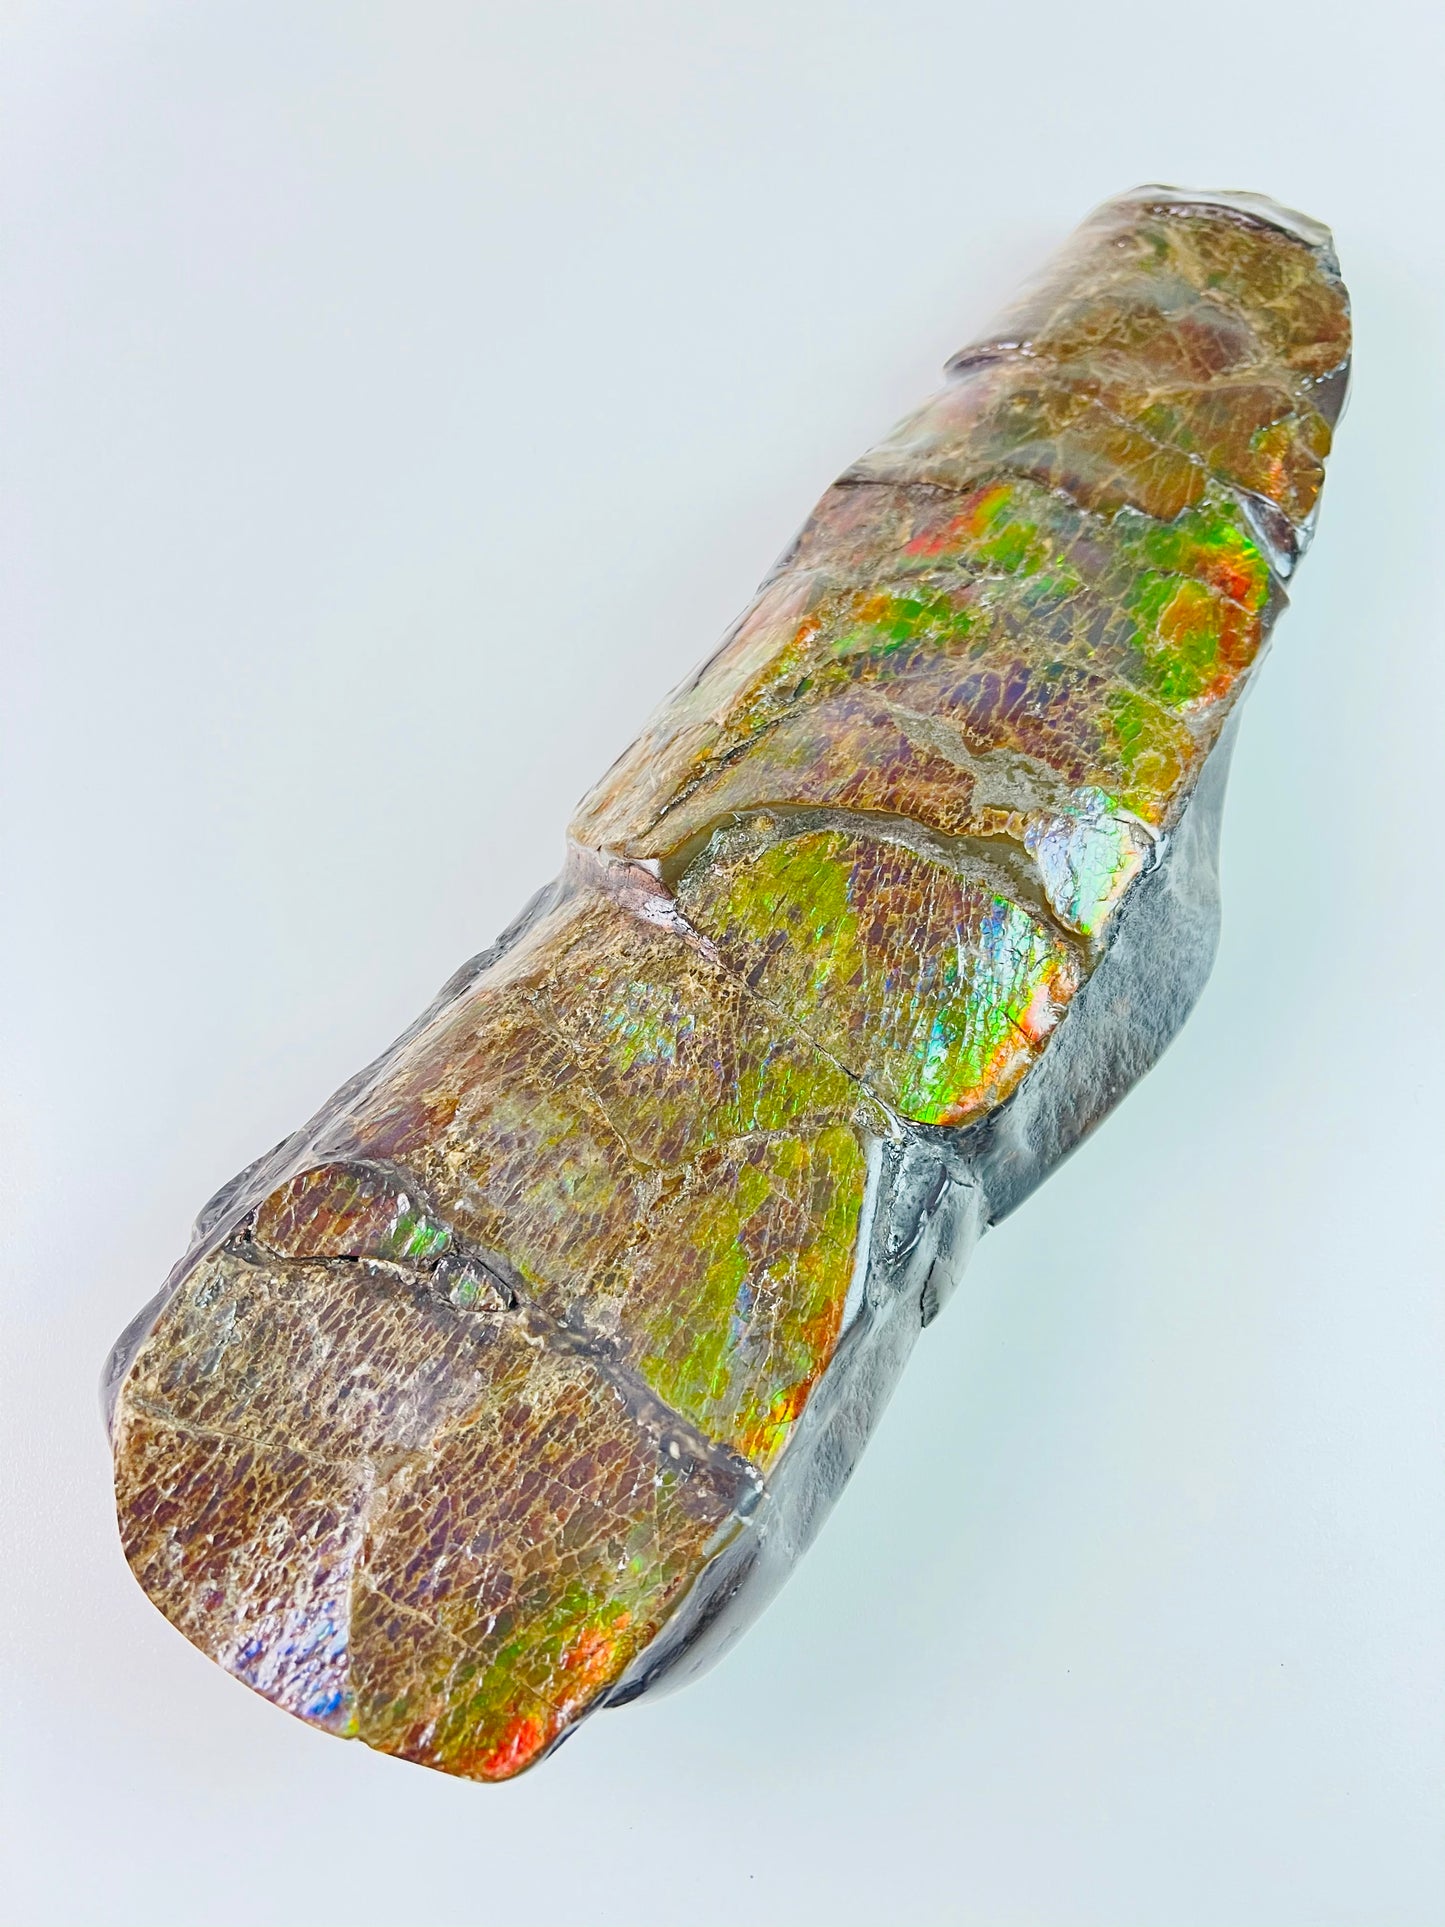 Ammolite Fossil - dragonskin rainbow color Baculite - extremely rare